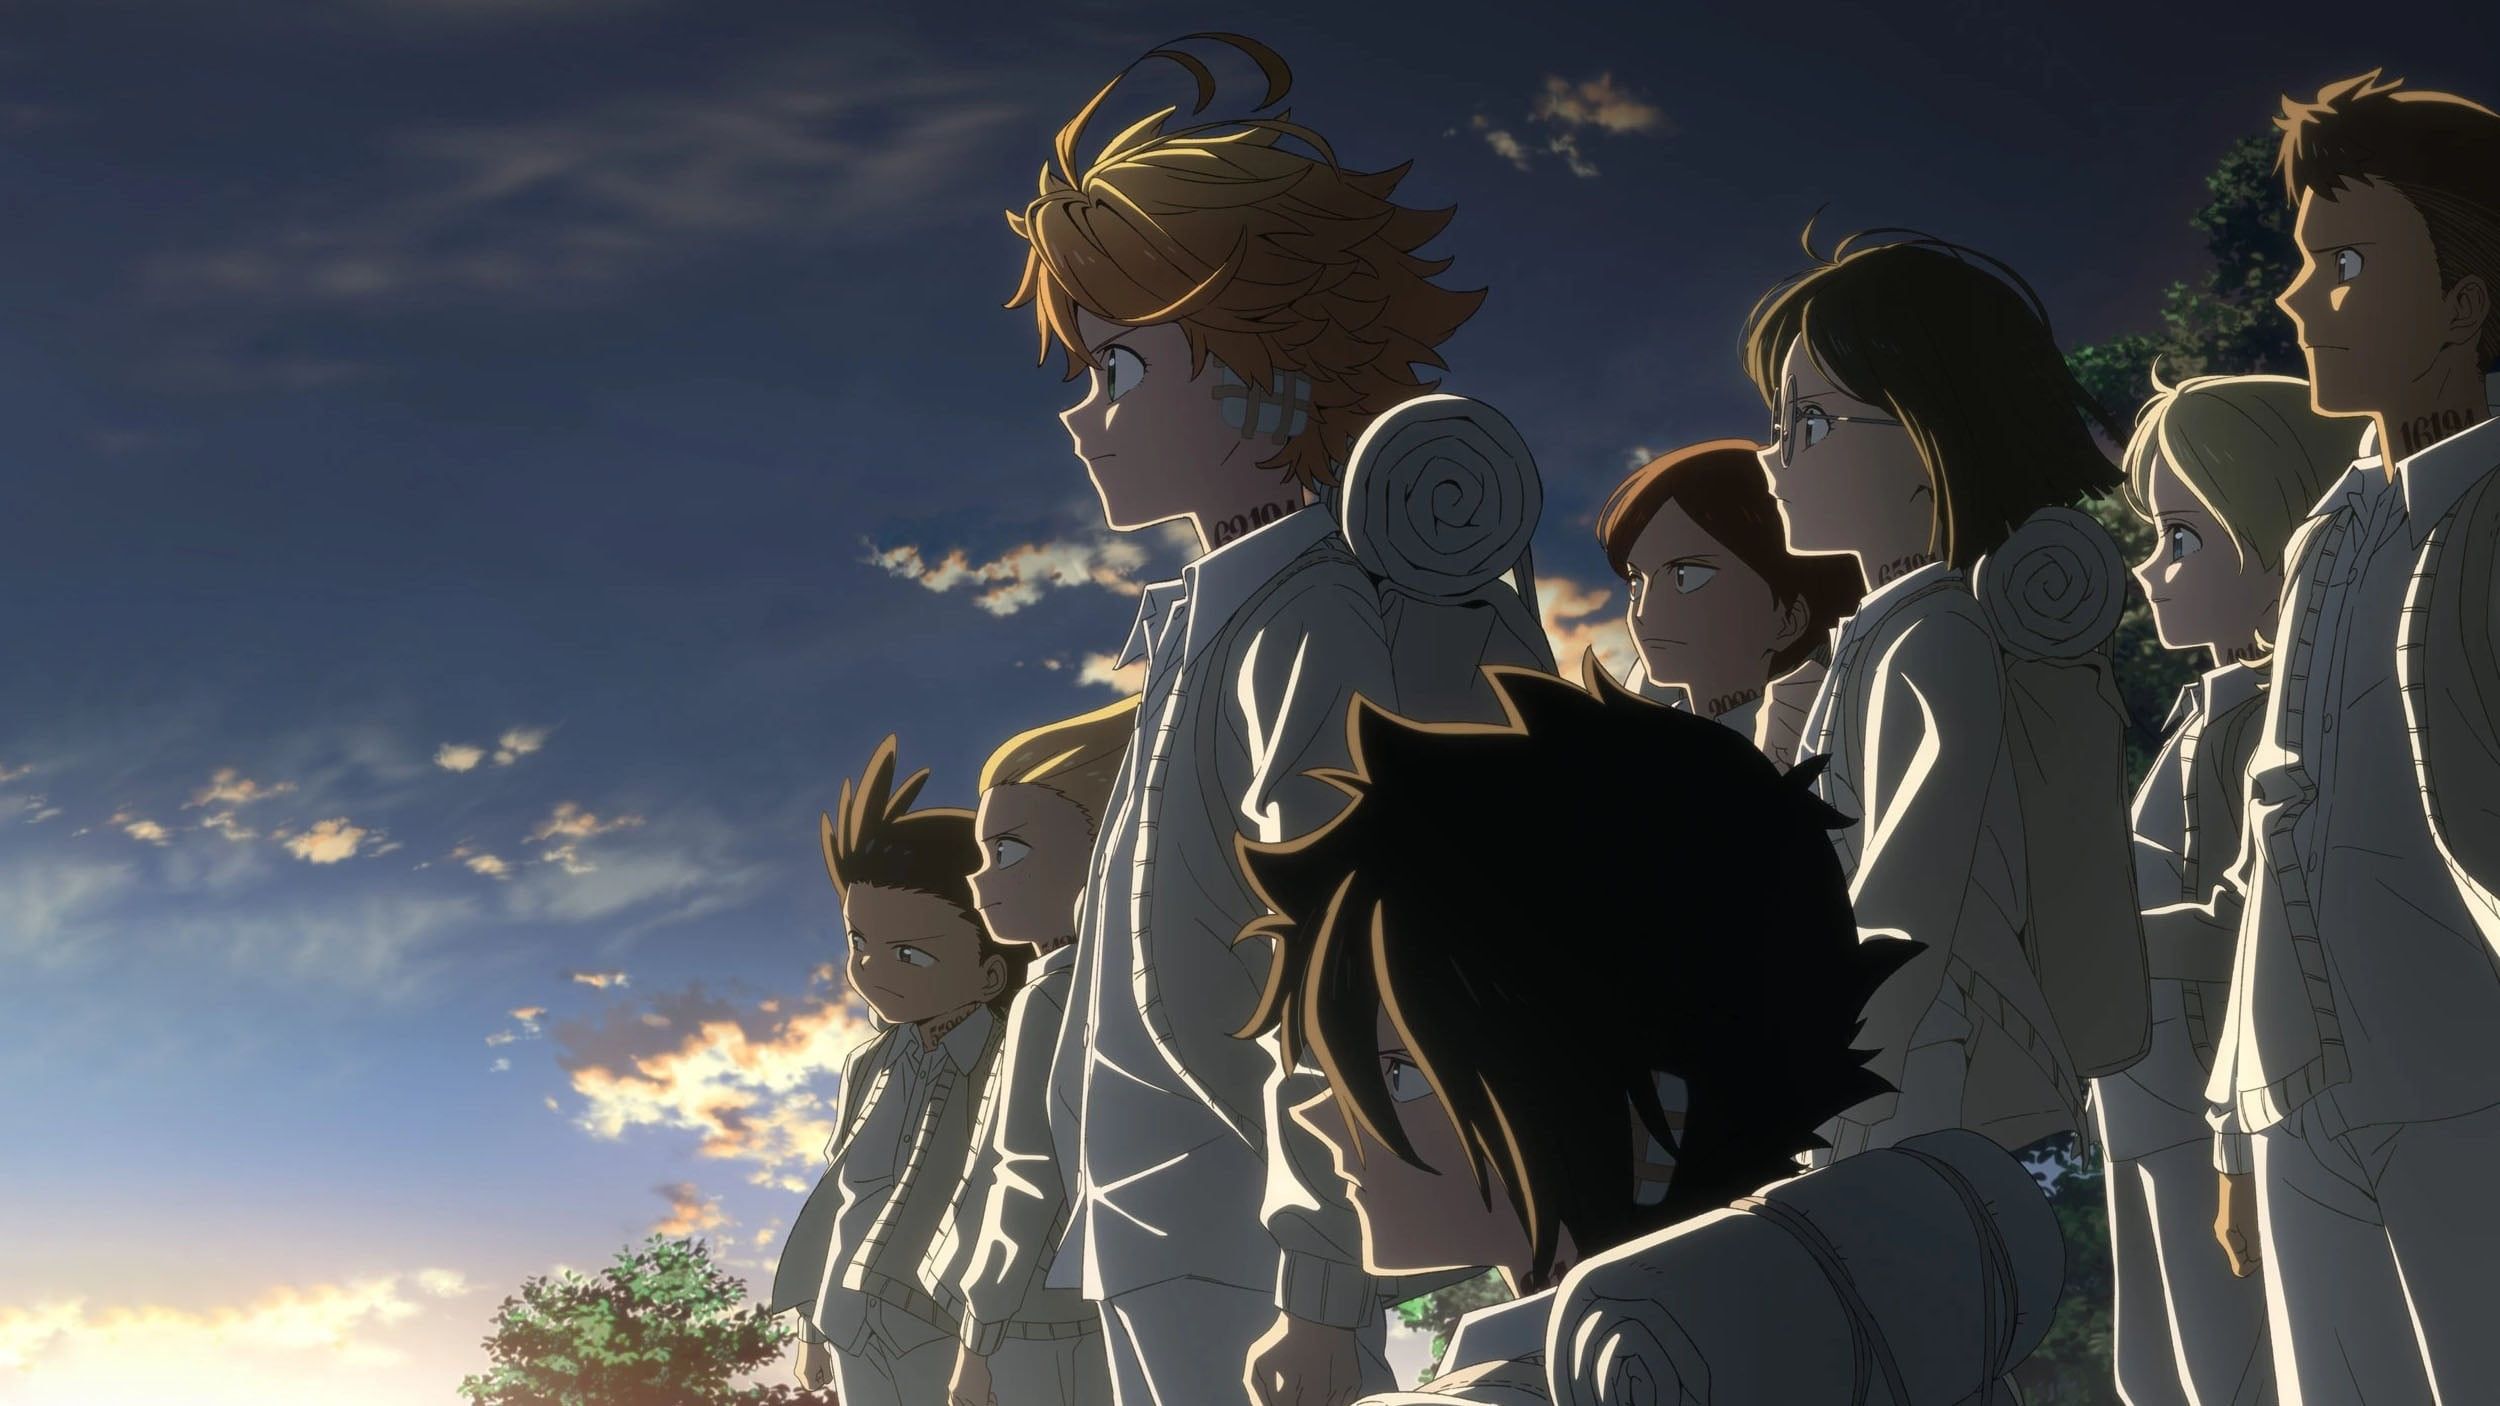 HD Wallpaper for theme: The promised neverland HD wallpaper, background